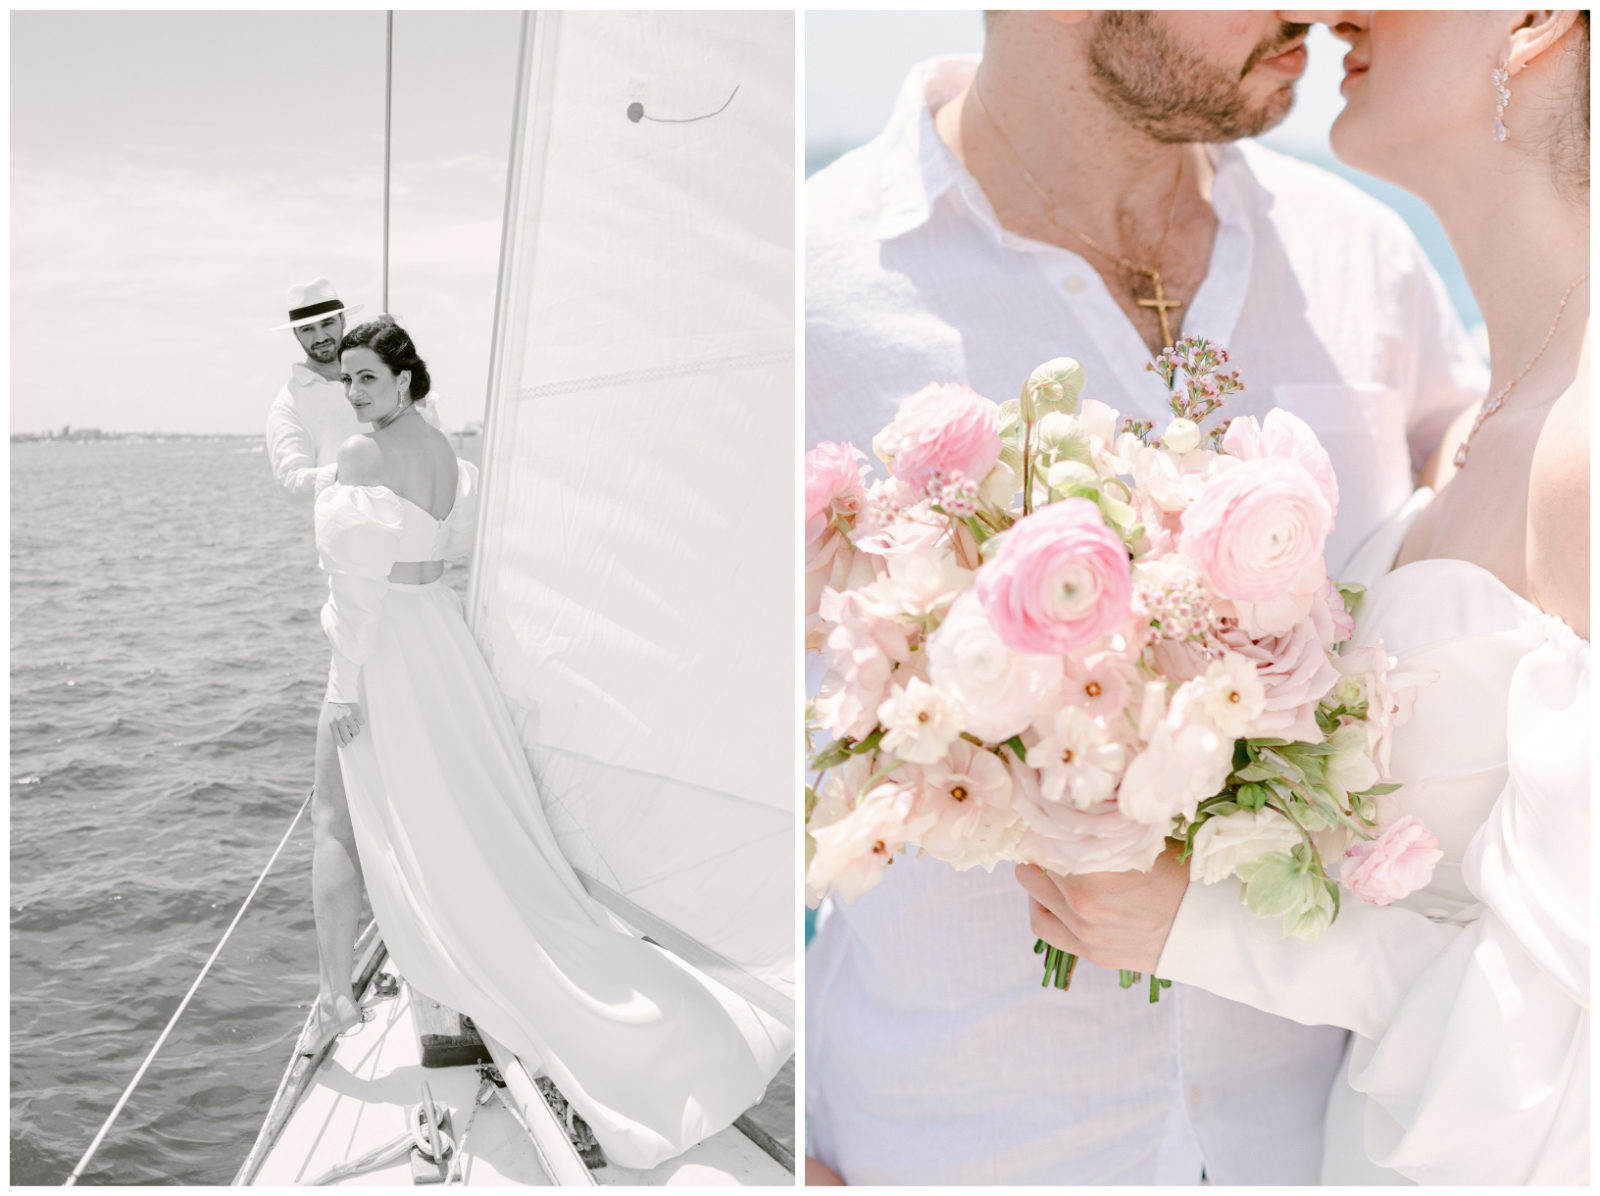 A magical southern wedding on a sailboat in South Florida